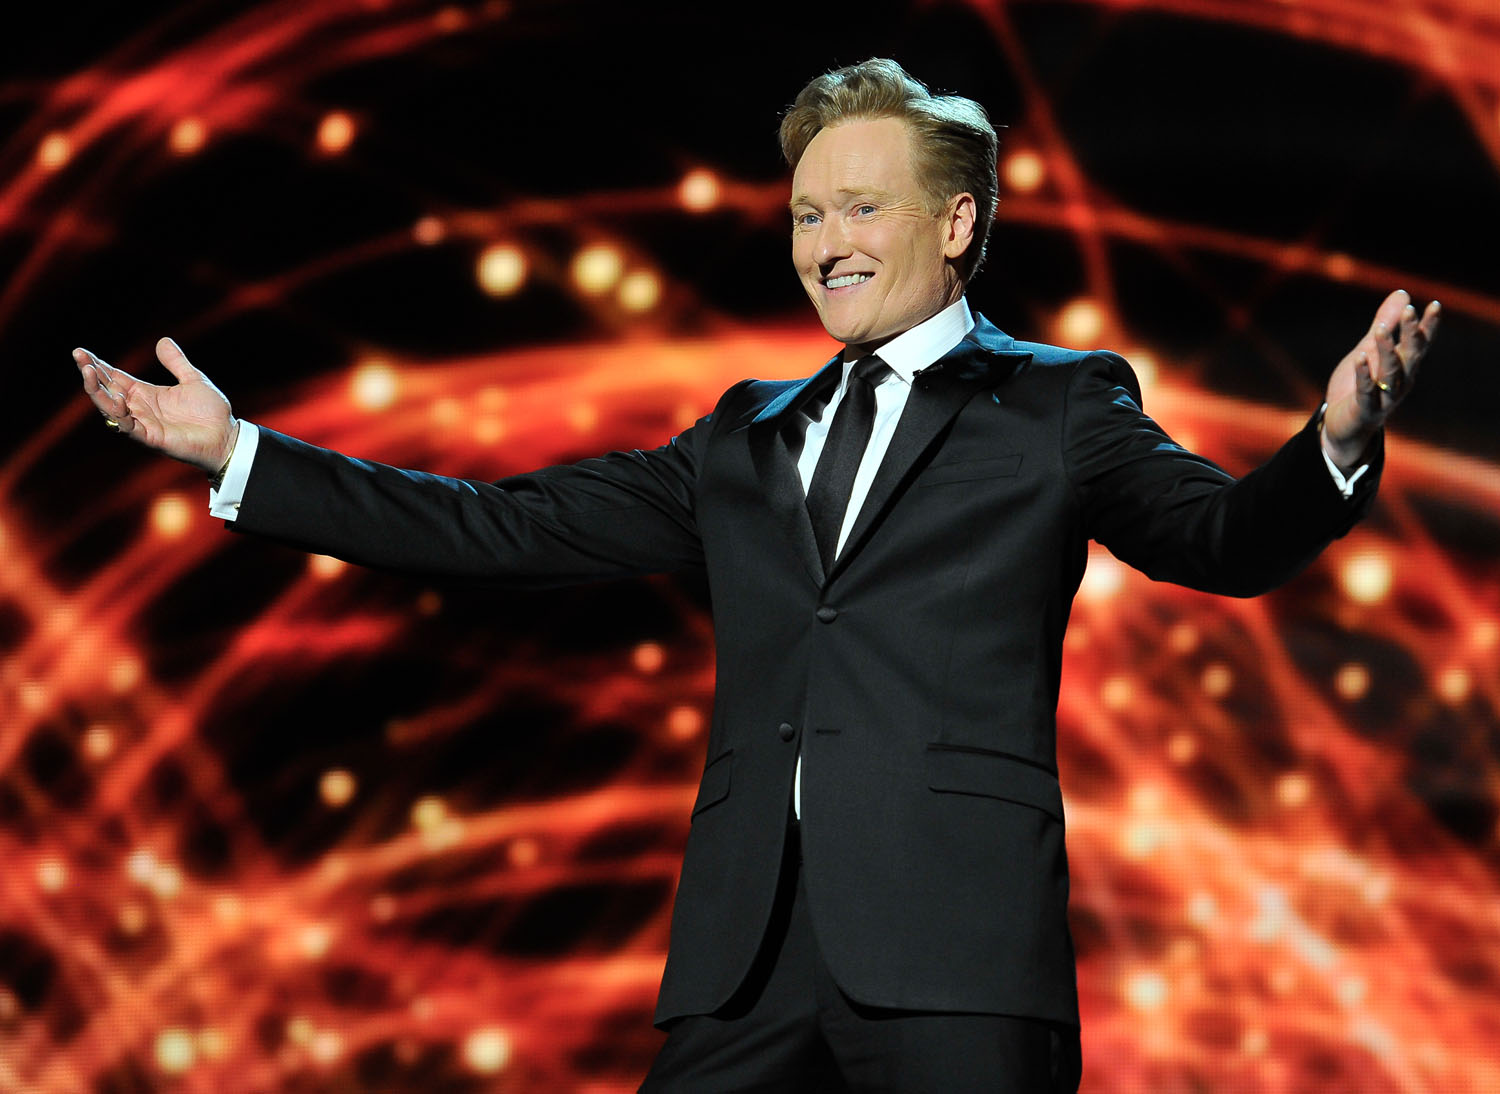 Conan O'Brien presents at the 2014 Breakthrough Prizes Awarded in Fundamental Physics and Life Sciences Ceremony at NASA Ames Research Center on December 12, 2013 in Mountain View, California. (Steve Jennings&mdash;Getty Images)